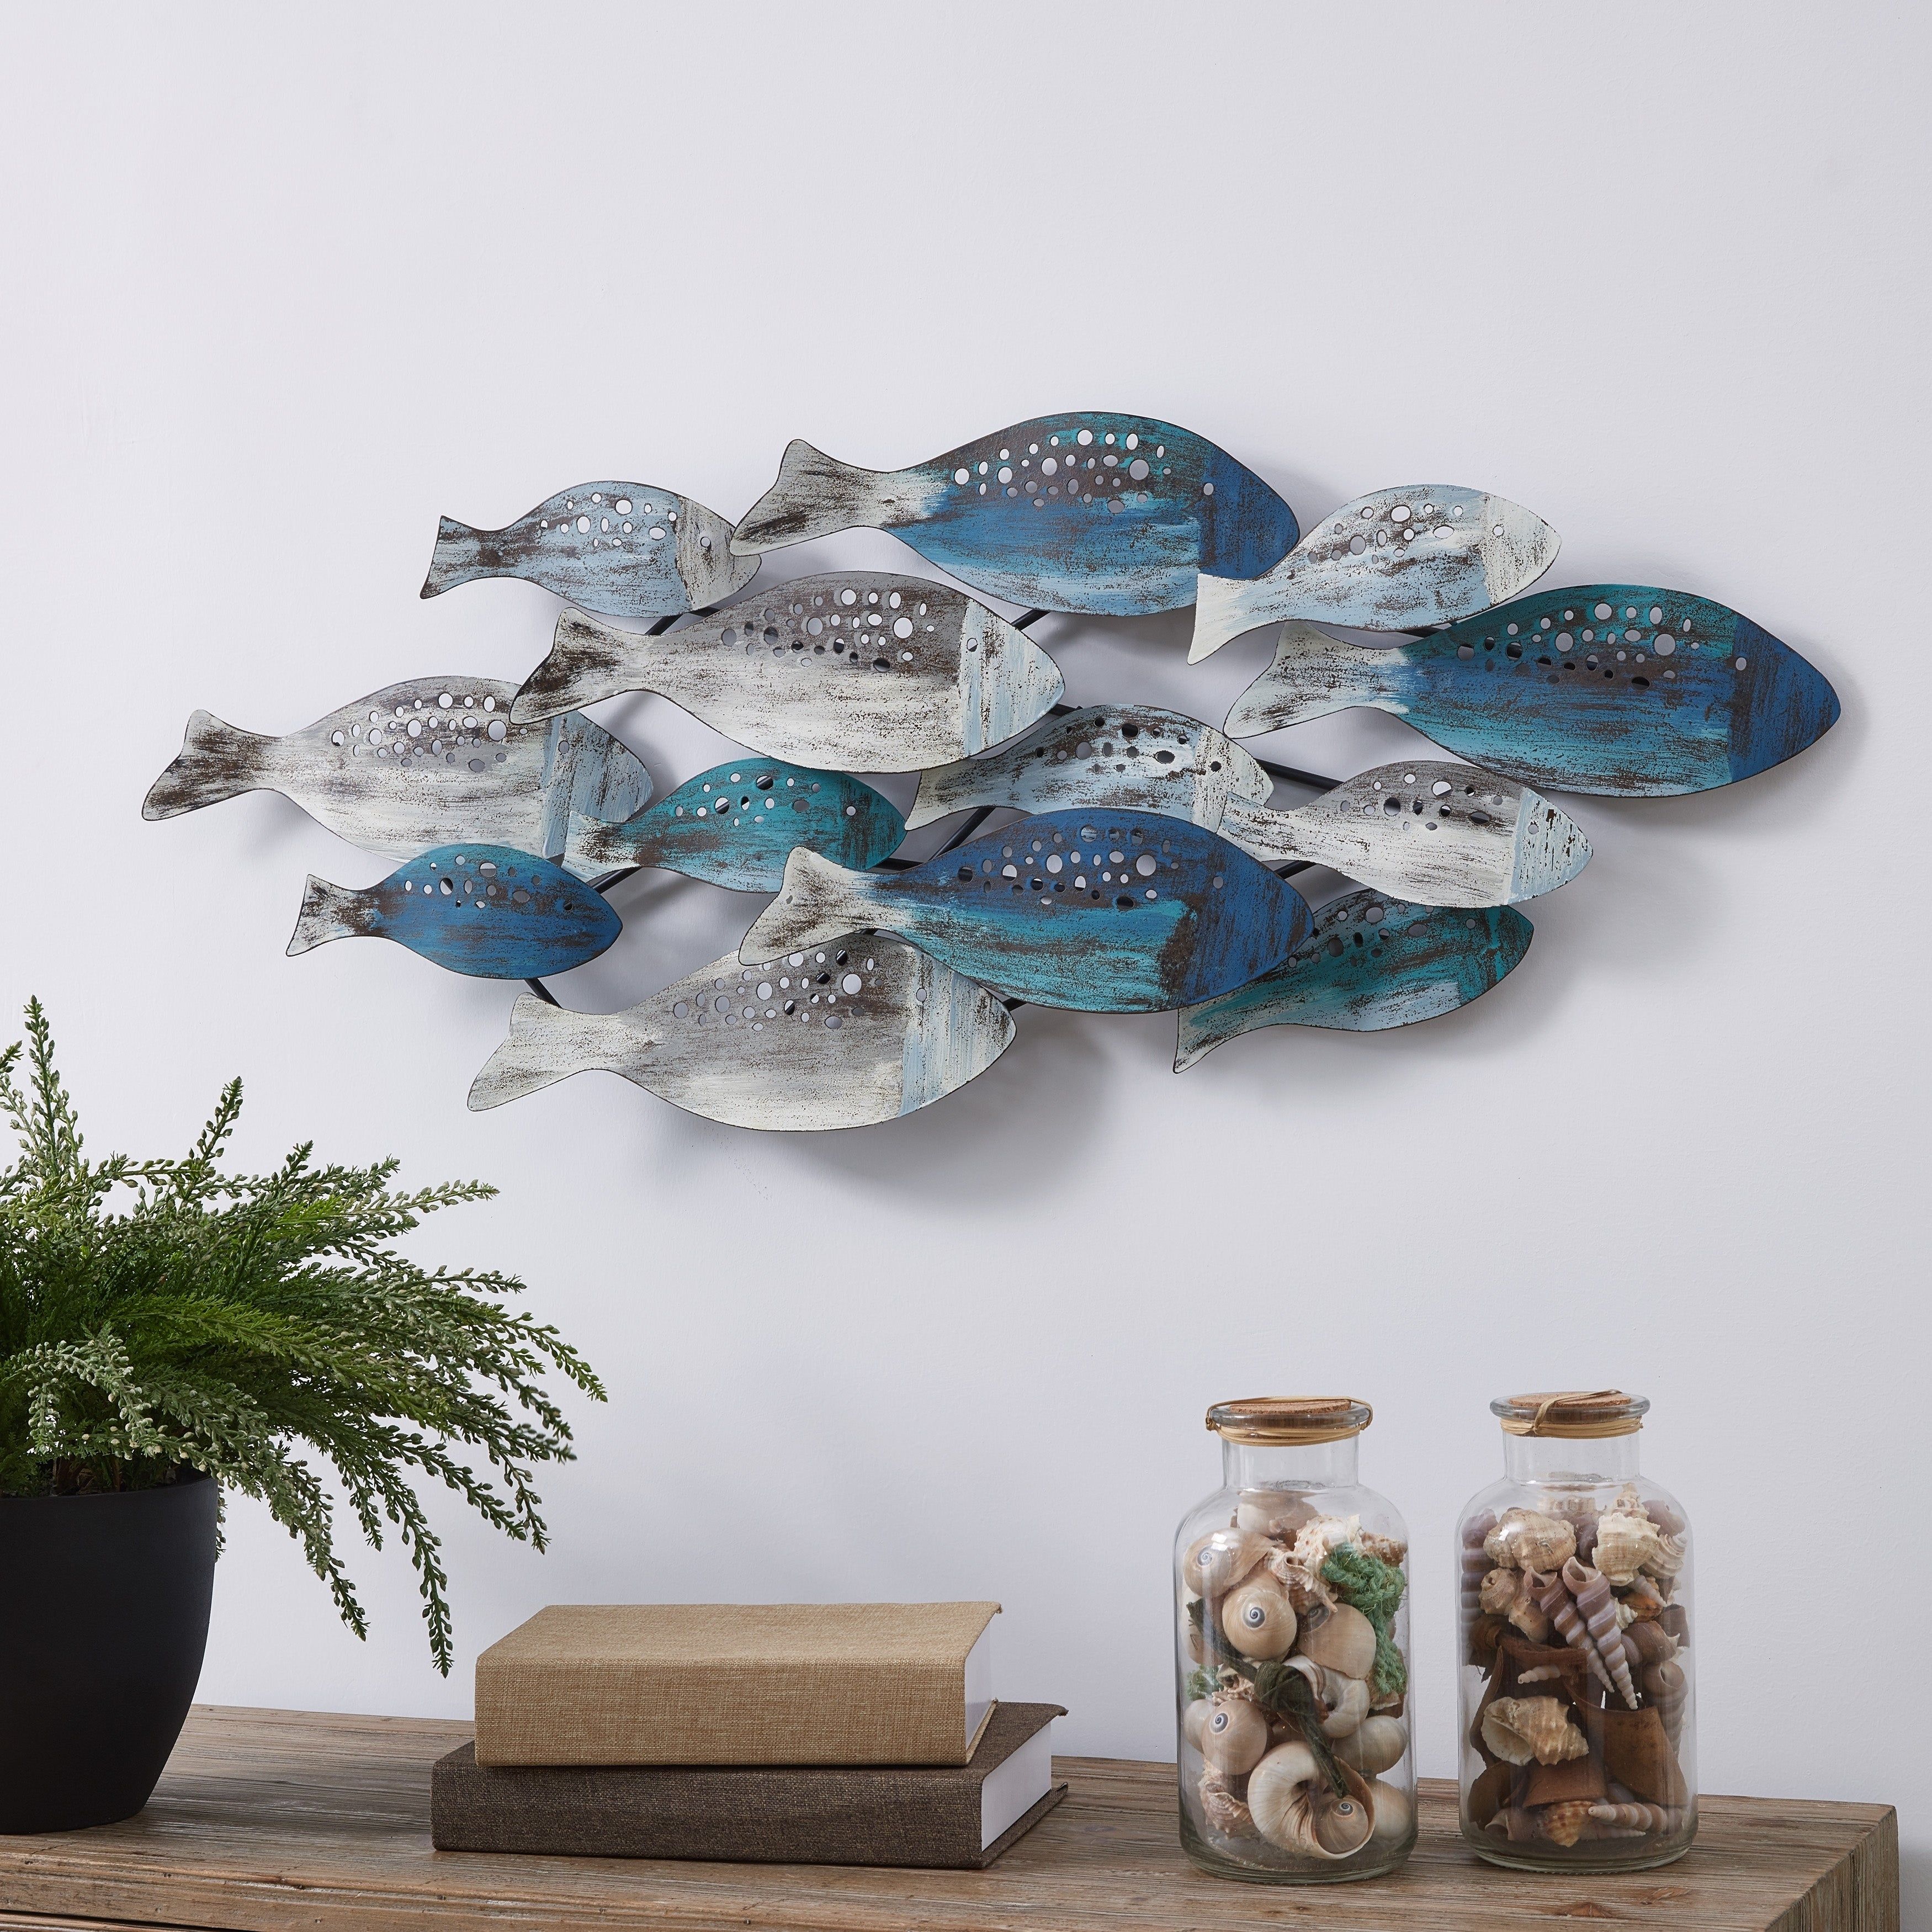 Buy Wall Decor Accent Pieces Online At Overstock | Our Best Within Rings Wall Decor By Wrought Studio (View 27 of 30)